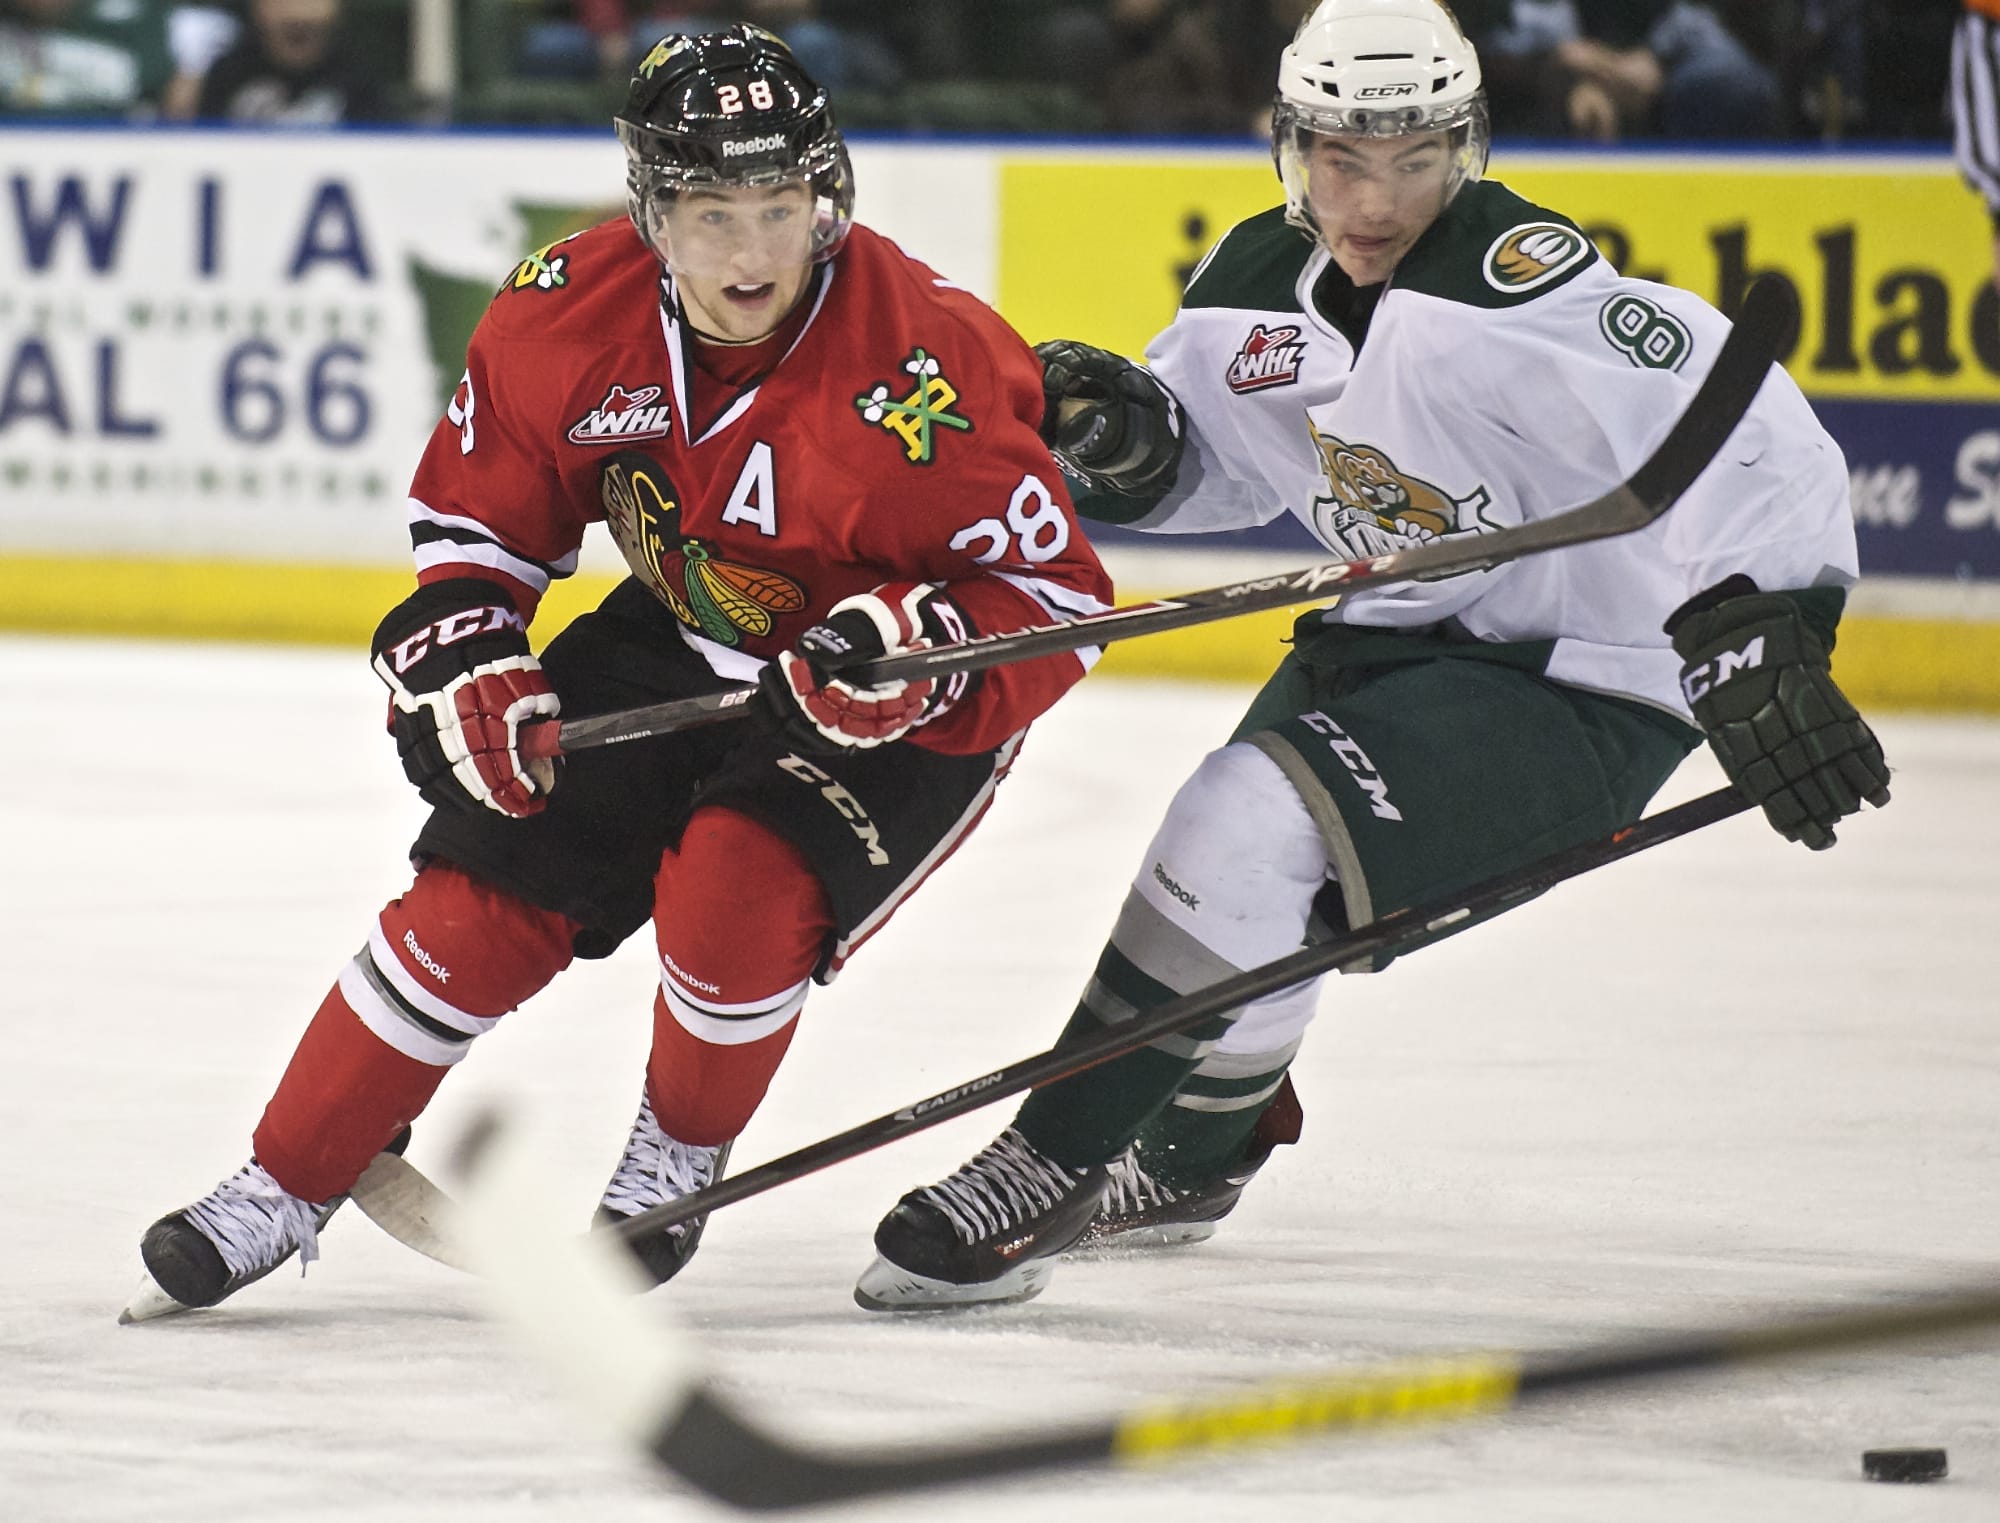 Brendan Leipsic has been one of the offensive leaders of the Winterhawks this season.